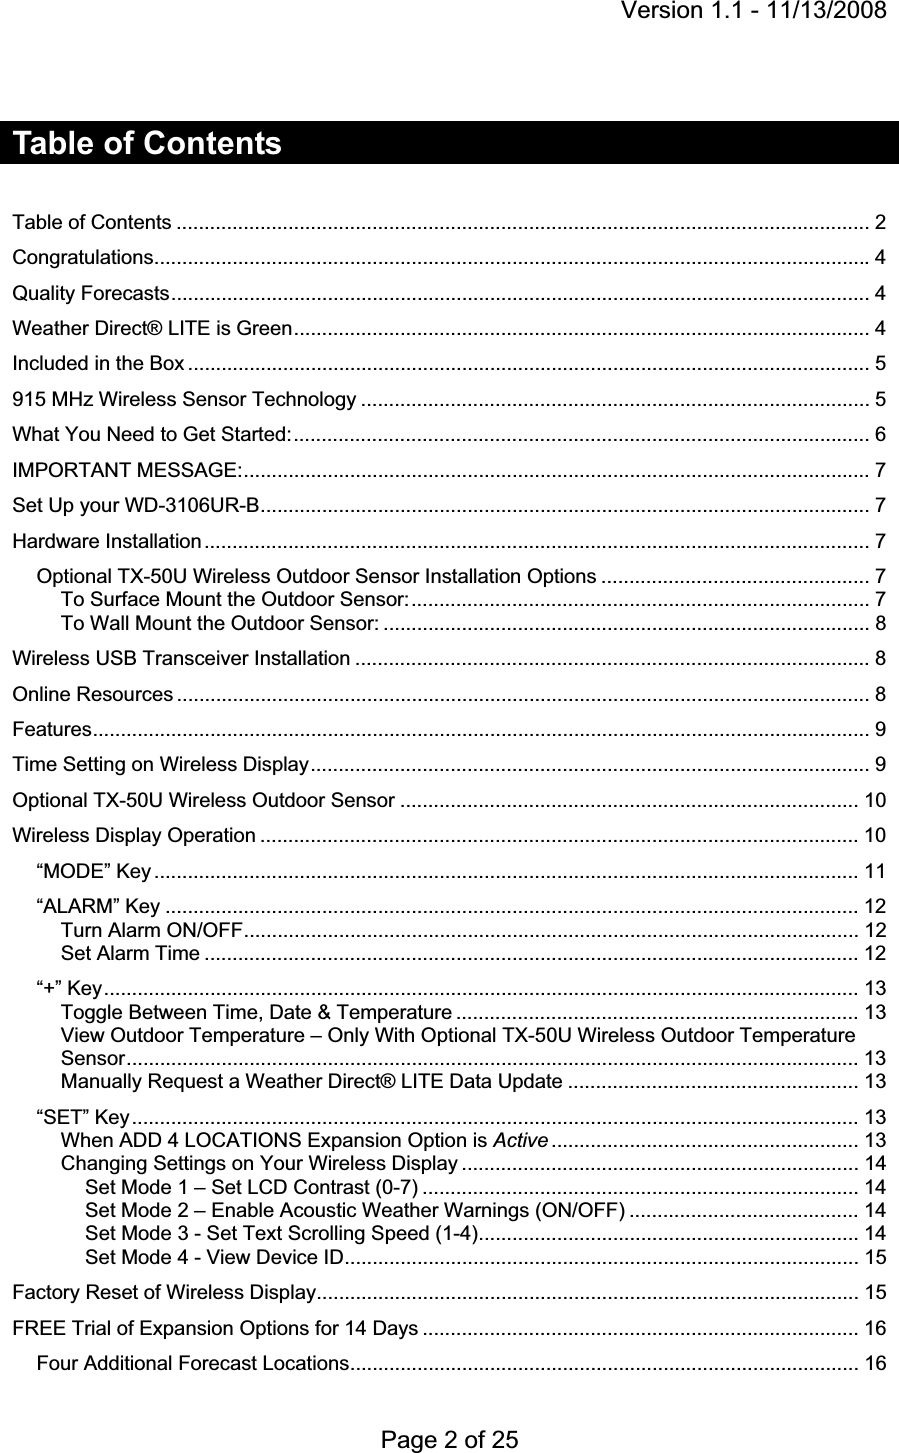 Version 1.1 - 11/13/2008 Page 2 of 25 Table of Contents Table of Contents ............................................................................................................................ 2Congratulations................................................................................................................................ 4Quality Forecasts ............................................................................................................................. 4Weather Direct® LITE is Green ....................................................................................................... 4Included in the Box .......................................................................................................................... 5915 MHz Wireless Sensor Technology ........................................................................................... 5What You Need to Get Started: ....................................................................................................... 6IMPORTANT MESSAGE: ................................................................................................................ 7Set Up your WD-3106UR-B ............................................................................................................. 7Hardware Installation ....................................................................................................................... 7Optional TX-50U Wireless Outdoor Sensor Installation Options ................................................ 7To Surface Mount the Outdoor Sensor: .................................................................................. 7To Wall Mount the Outdoor Sensor: ....................................................................................... 8Wireless USB Transceiver Installation ............................................................................................ 8Online Resources ............................................................................................................................ 8Features........................................................................................................................................... 9Time Setting on Wireless Display .................................................................................................... 9Optional TX-50U Wireless Outdoor Sensor .................................................................................. 10Wireless Display Operation ........................................................................................................... 10“MODE” Key .............................................................................................................................. 11“ALARM” Key ............................................................................................................................ 12Turn Alarm ON/OFF .............................................................................................................. 12Set Alarm Time ..................................................................................................................... 12“+” Key ....................................................................................................................................... 13Toggle Between Time, Date &amp; Temperature ........................................................................ 13View Outdoor Temperature – Only With Optional TX-50U Wireless Outdoor Temperature Sensor ................................................................................................................................... 13Manually Request a Weather Direct® LITE Data Update .................................................... 13“SET” Key .................................................................................................................................. 13When ADD 4 LOCATIONS Expansion Option is Active .......................................................  13Changing Settings on Your Wireless Display ....................................................................... 14Set Mode 1 – Set LCD Contrast (0-7) .............................................................................. 14Set Mode 2 – Enable Acoustic Weather Warnings (ON/OFF) ......................................... 14Set Mode 3 - Set Text Scrolling Speed (1-4) .................................................................... 14Set Mode 4 - View Device ID ............................................................................................ 15Factory Reset of Wireless Display ................................................................................................. 15FREE Trial of Expansion Options for 14 Days .............................................................................. 16Four Additional Forecast Locations ........................................................................................... 16